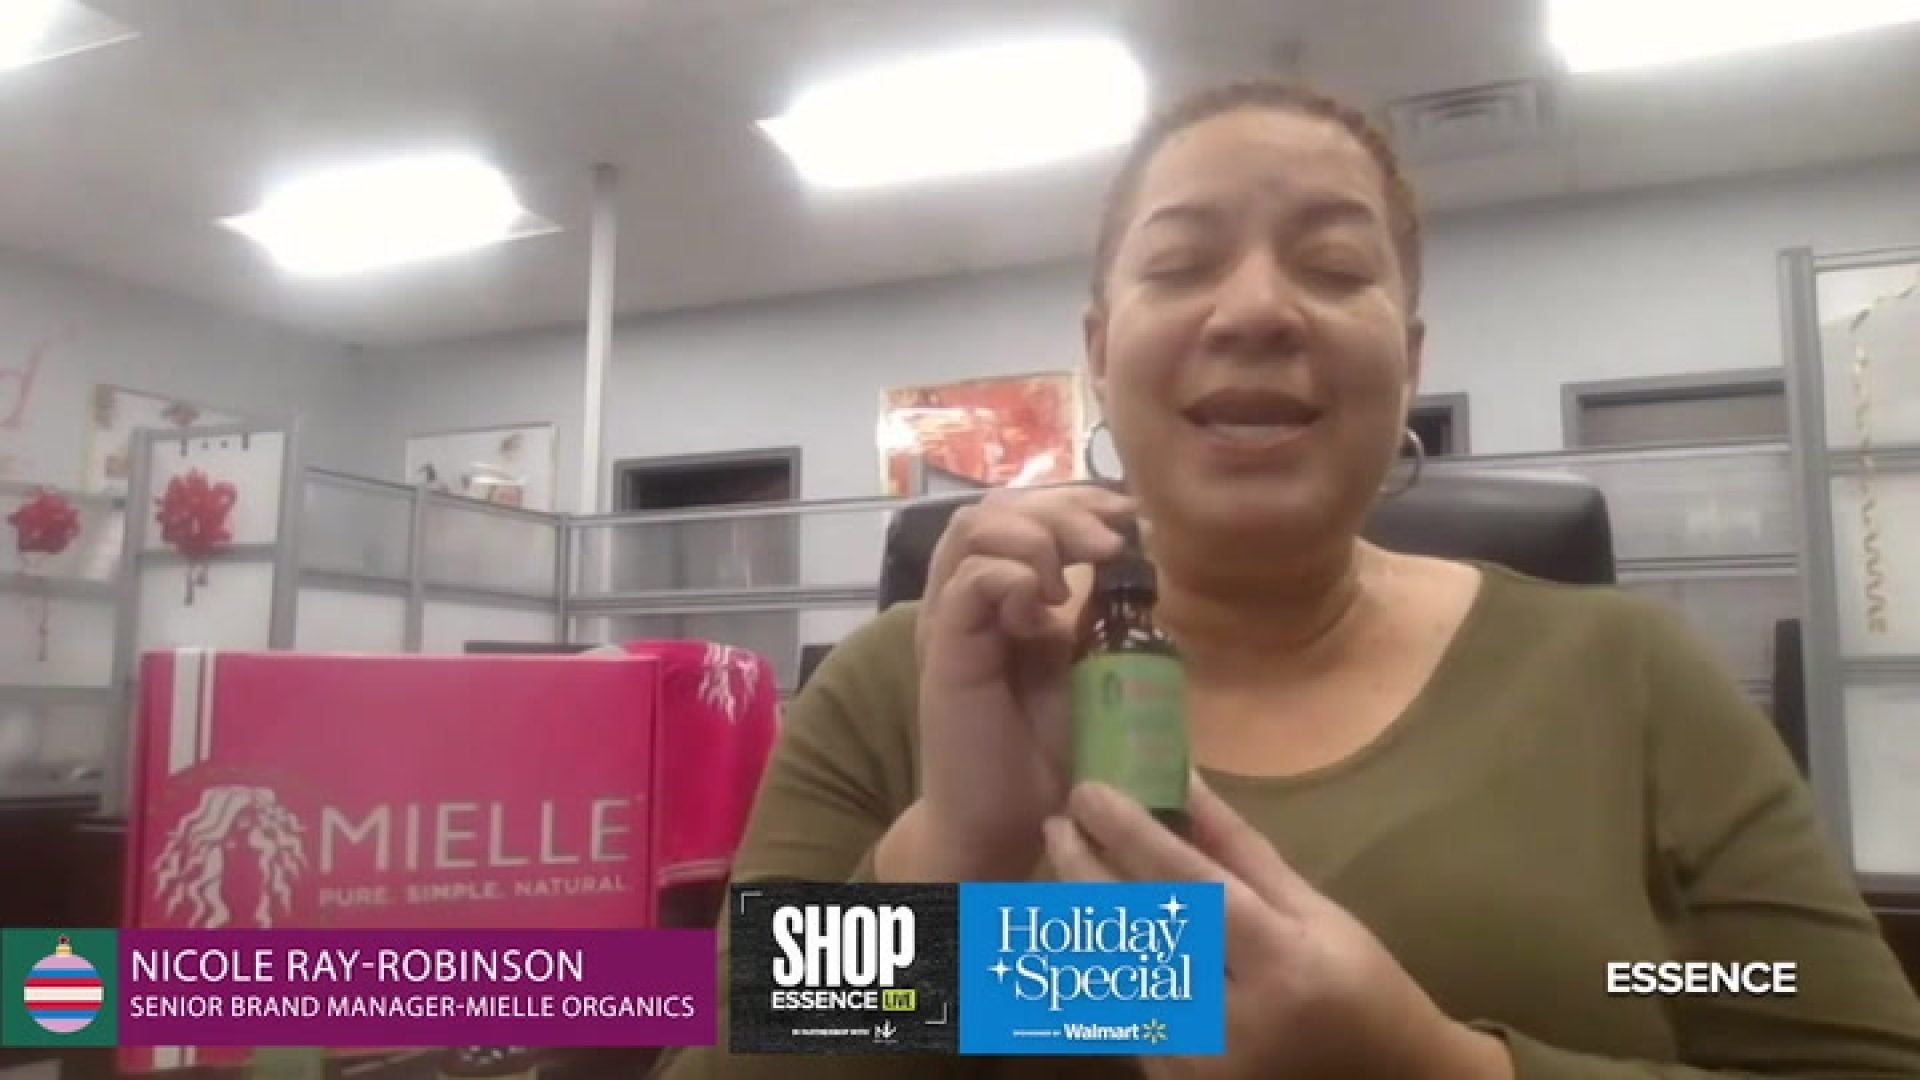 WATCH: Mielle Organics’ Products Are Top Tier Stocking Stuffers